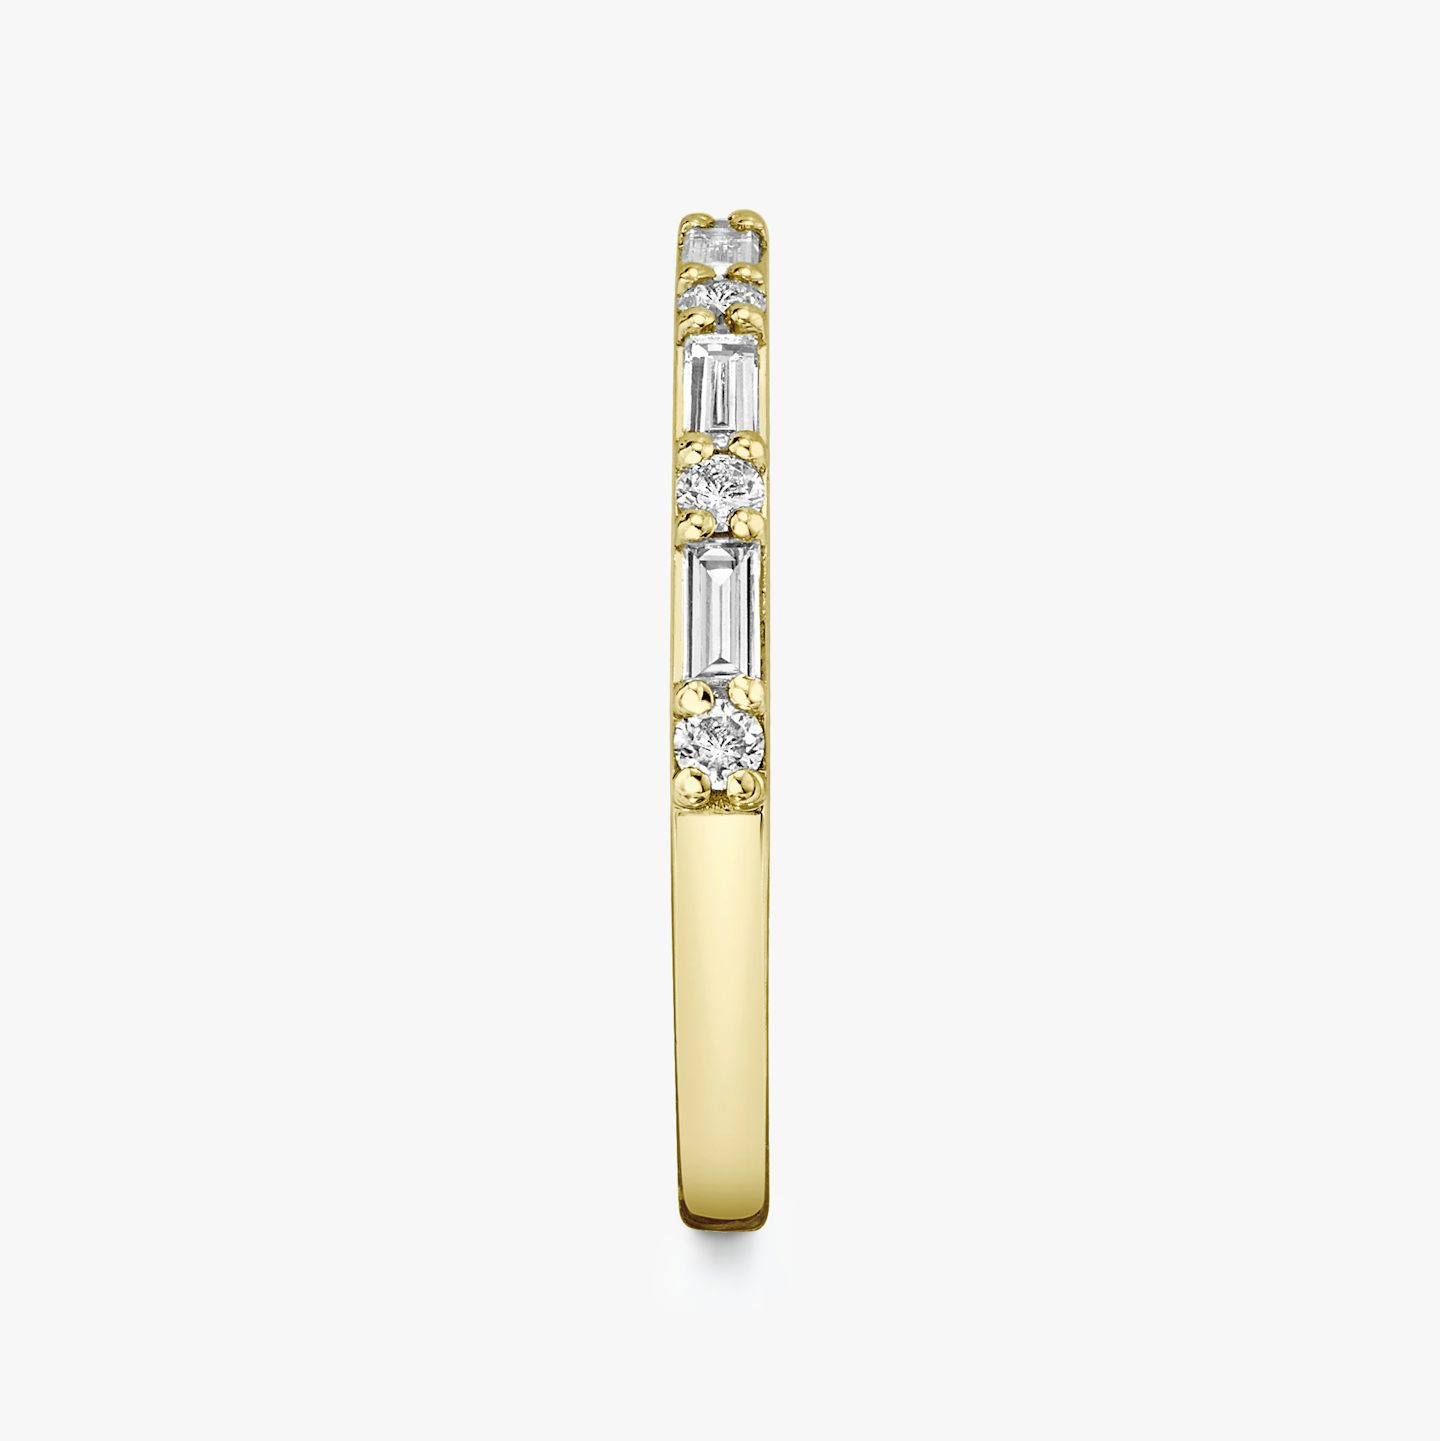 The Alternating Shapes Band | Round Brilliant | 18k | Yellow Gold | bandStyle: half